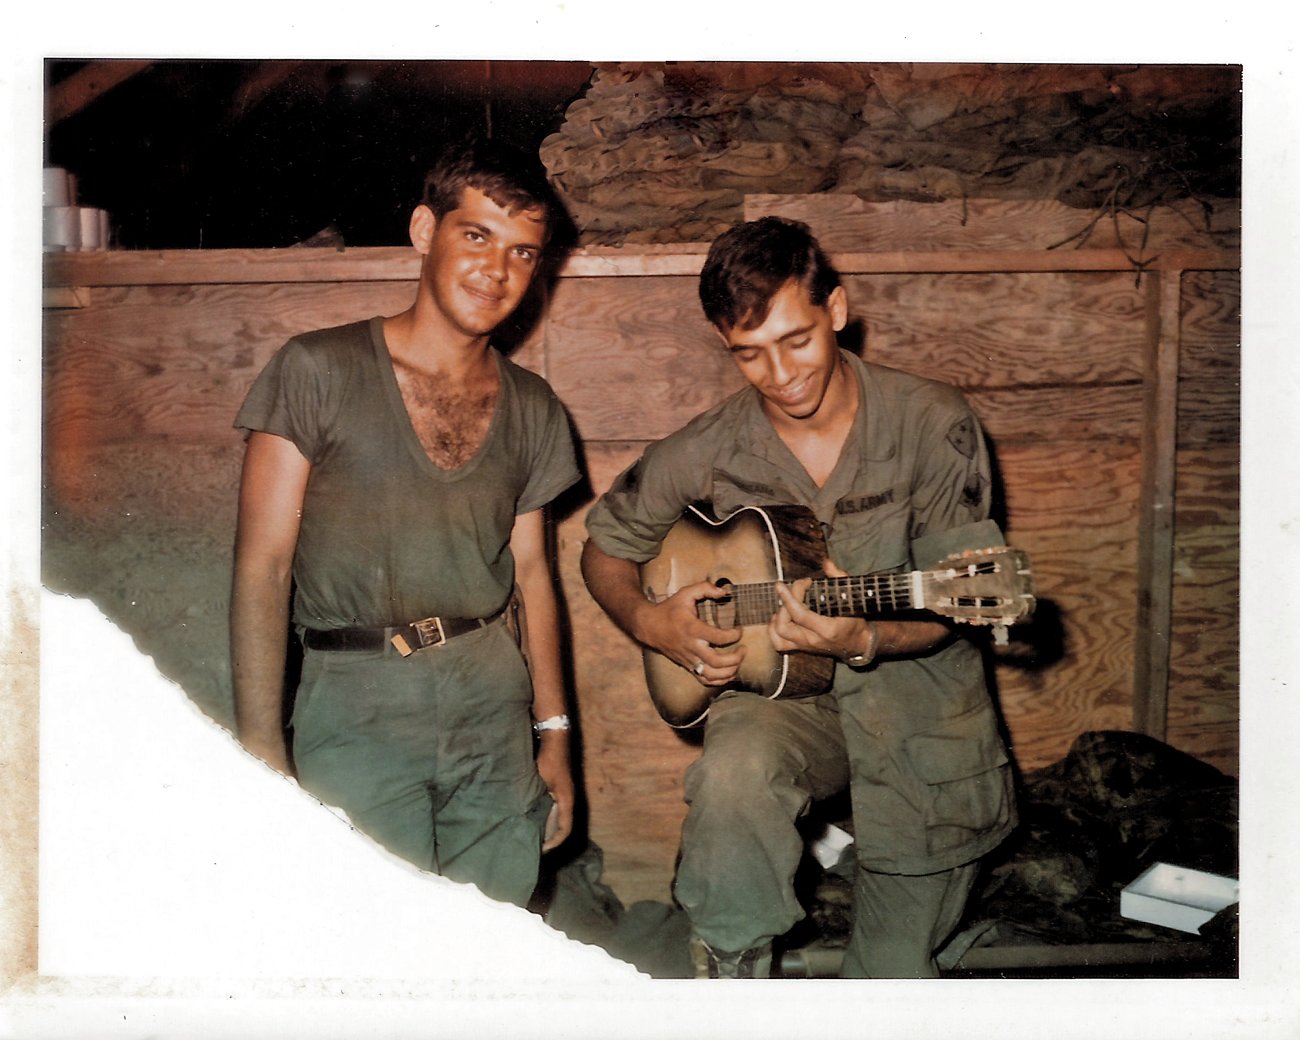 US soldiers in Vietnam playing guitar